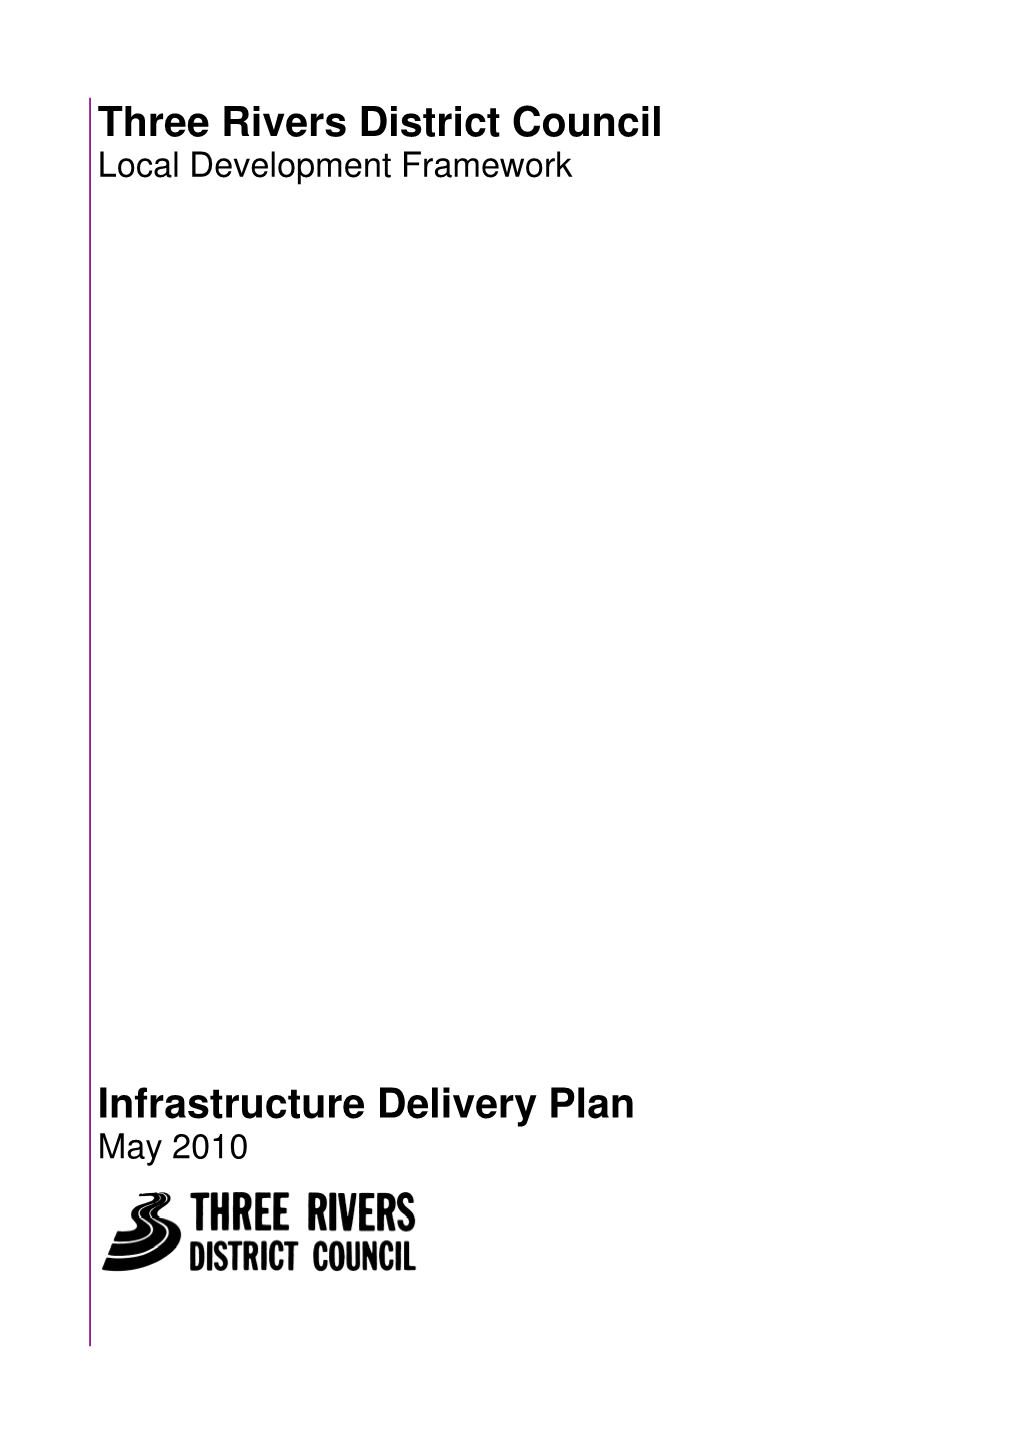 Three Rivers District Council Infrastructure Delivery Plan